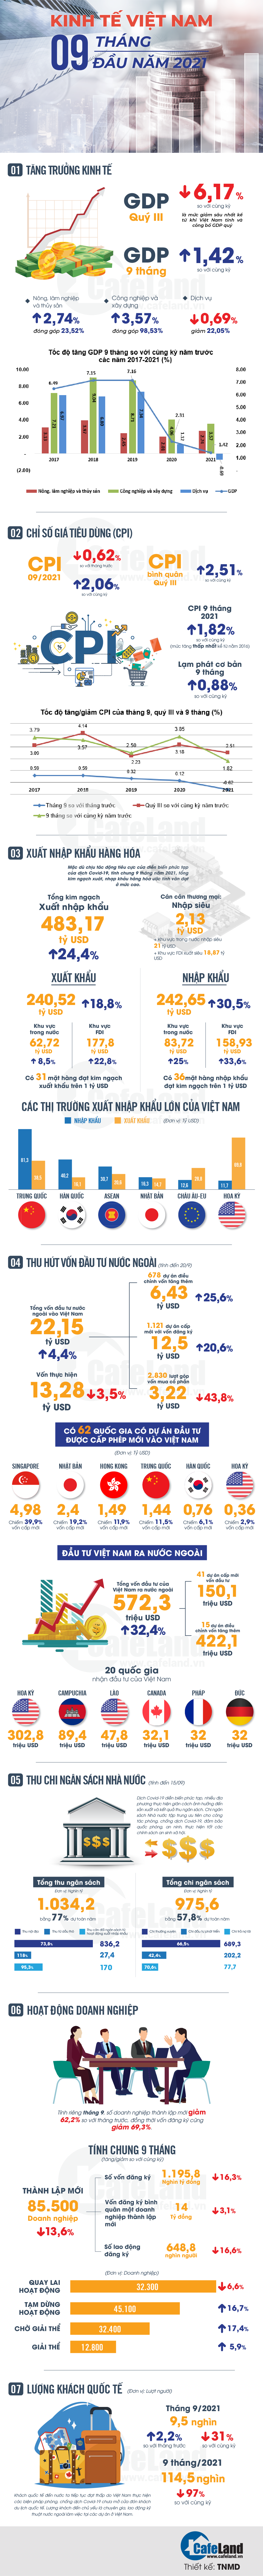 Vietnam's economy in the first 9 months of 2021 through numbers